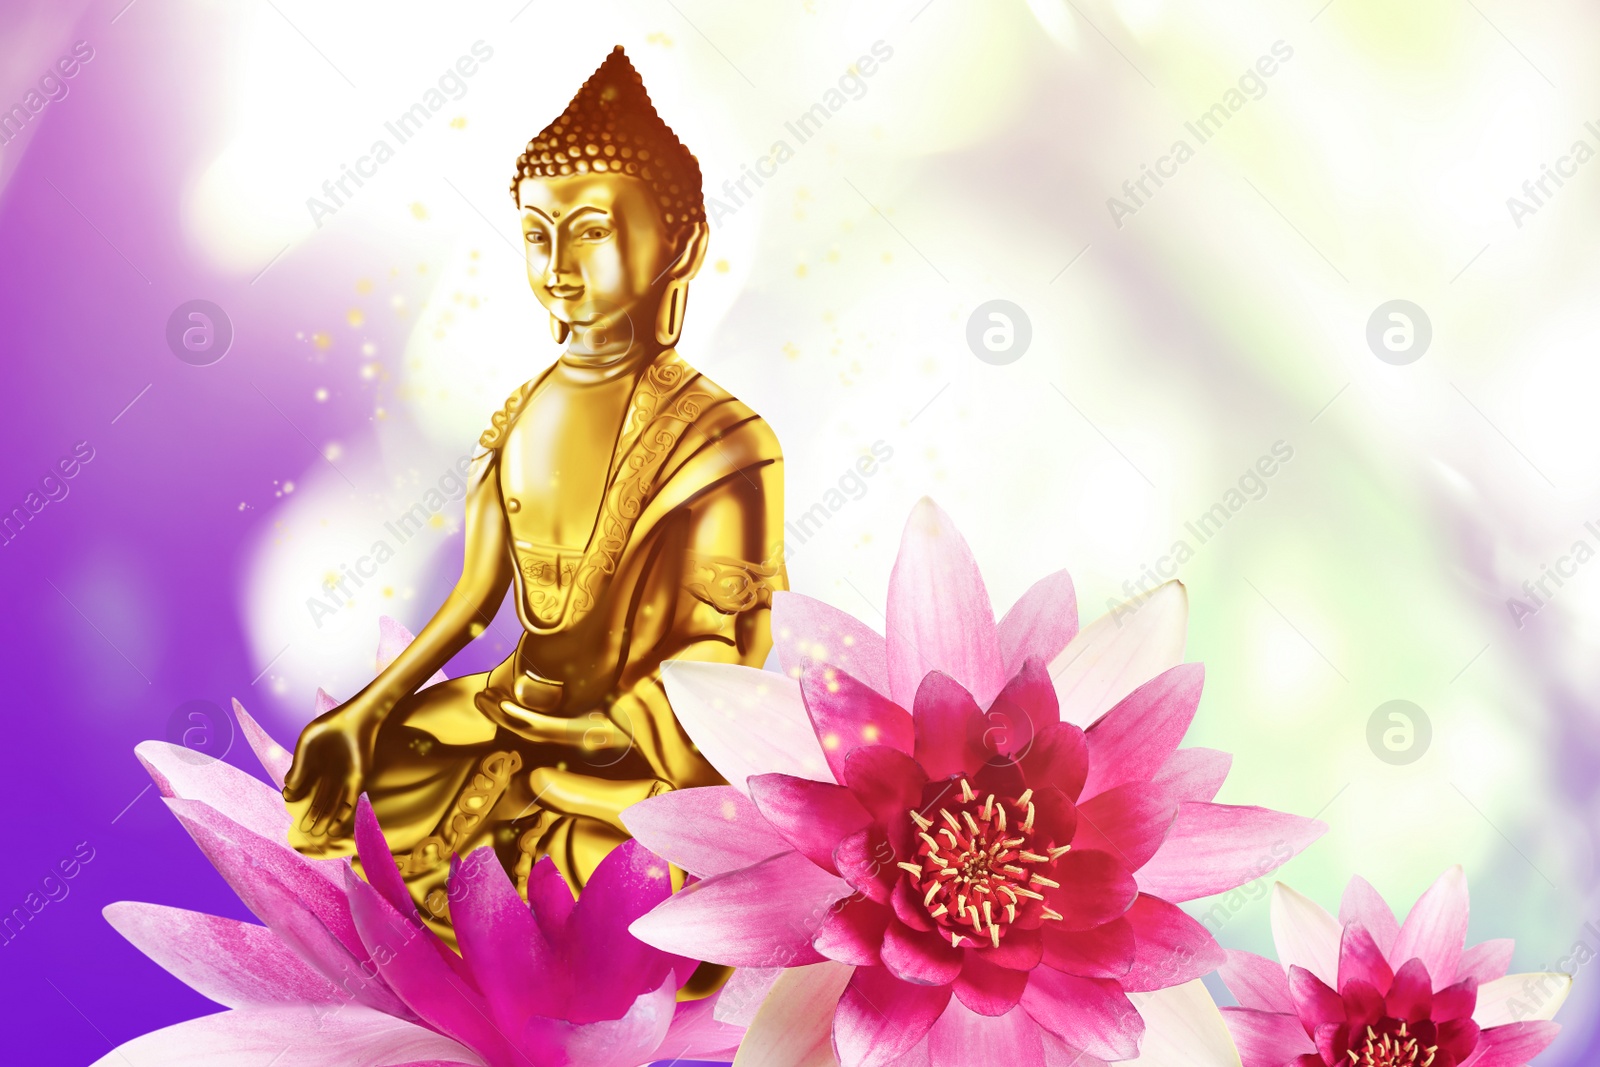 Image of Buddha figure and lotus flowers on bright background 